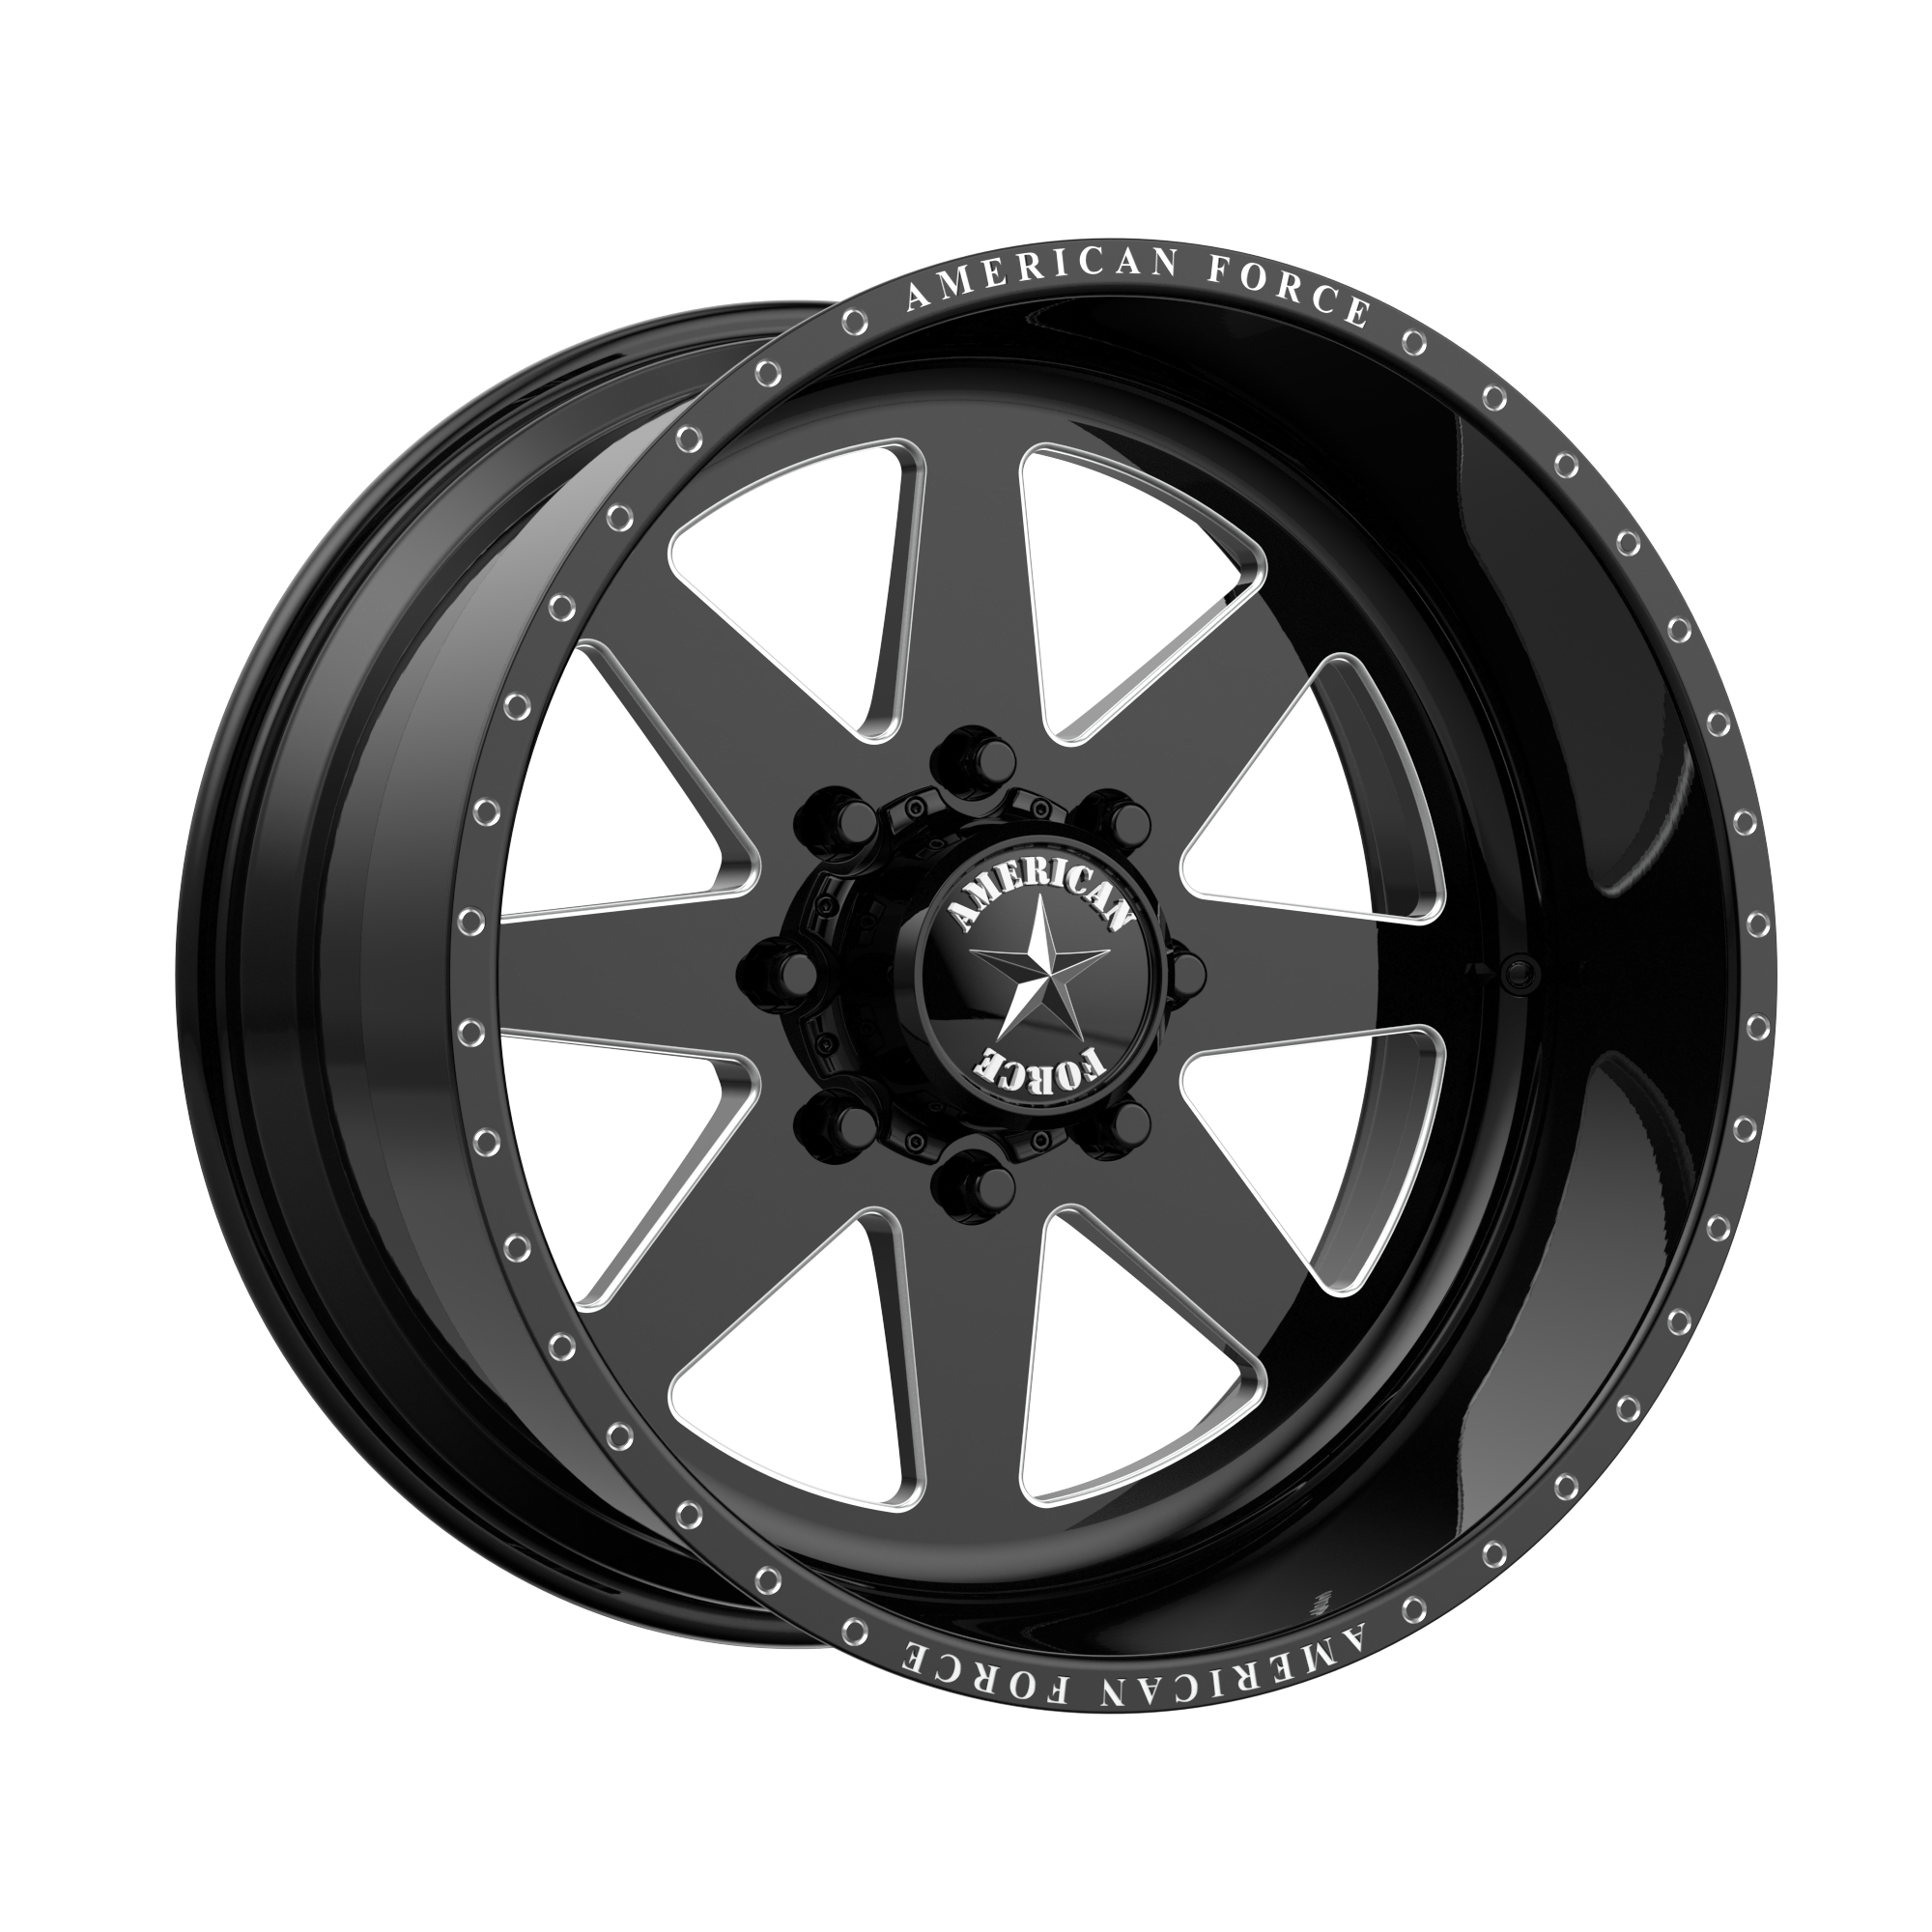 INDEPENDENCE SS 20x14 8x180.00 GLOSS BLACK MACHINED (-73 mm) - Tires and Engine Performance